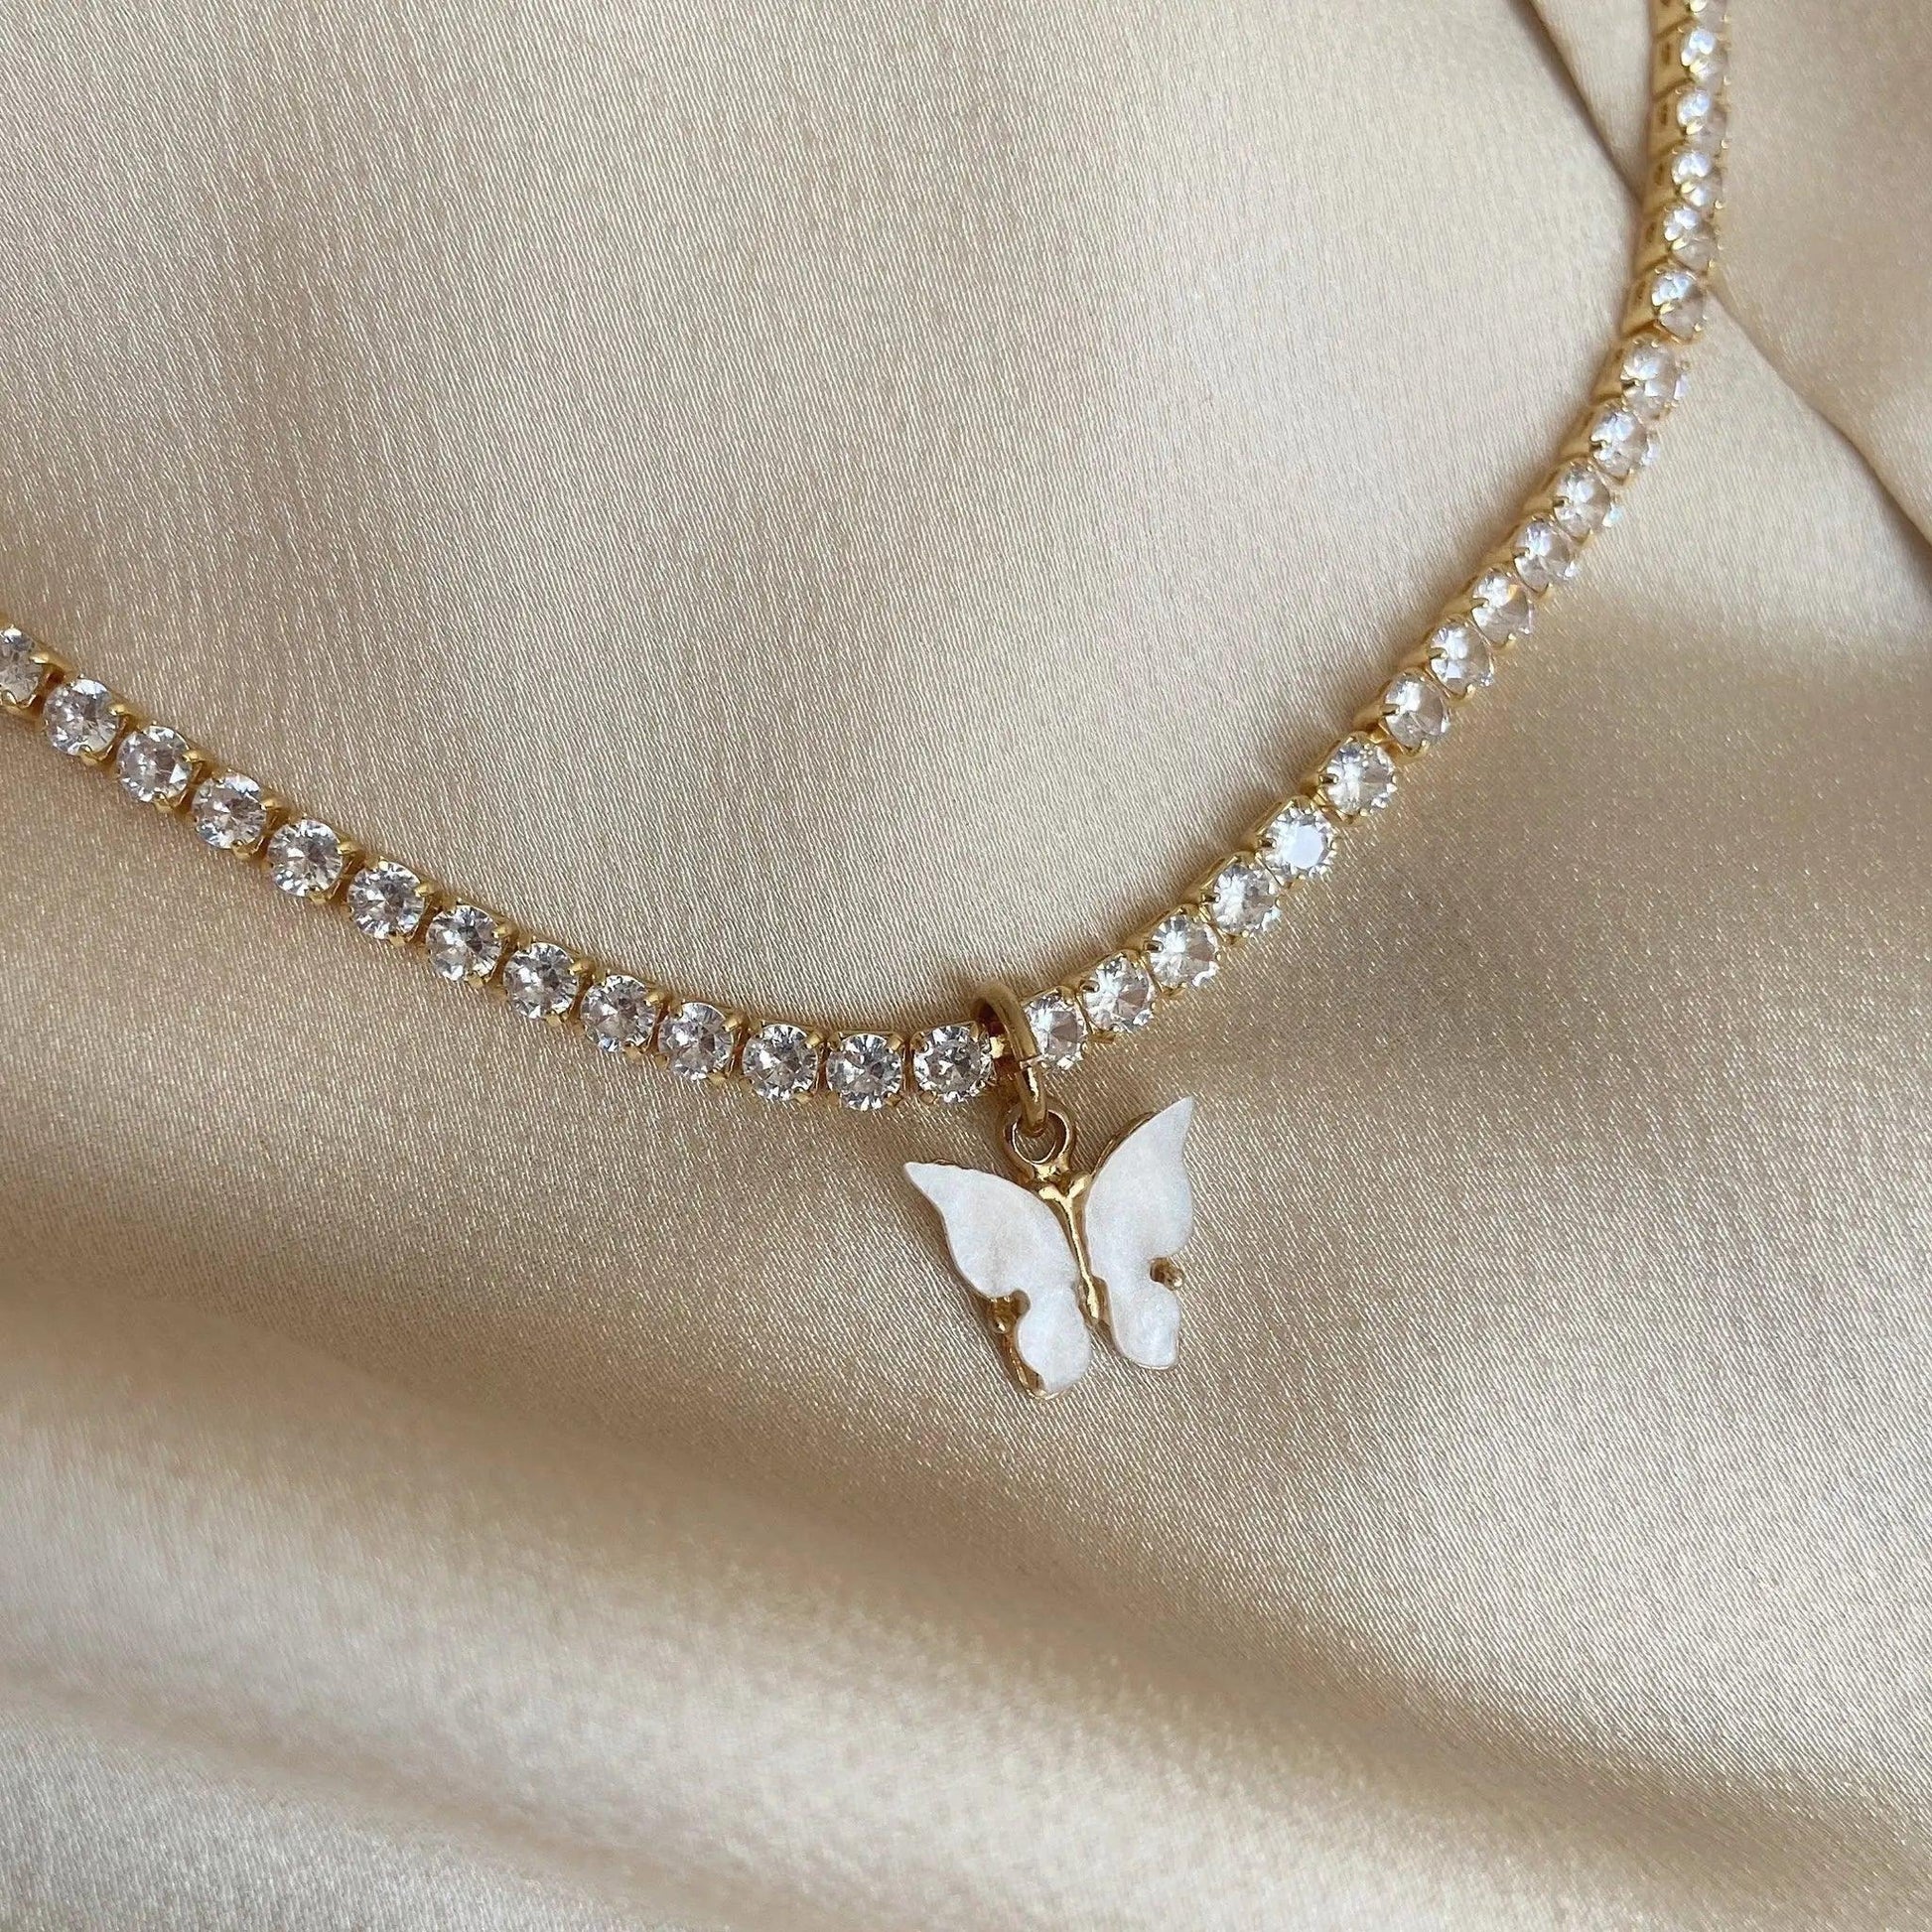 Pearl Butterfly Choker Necklace With Tennis Chain - Camillaboutiqueco camillaboutiqueshop.com